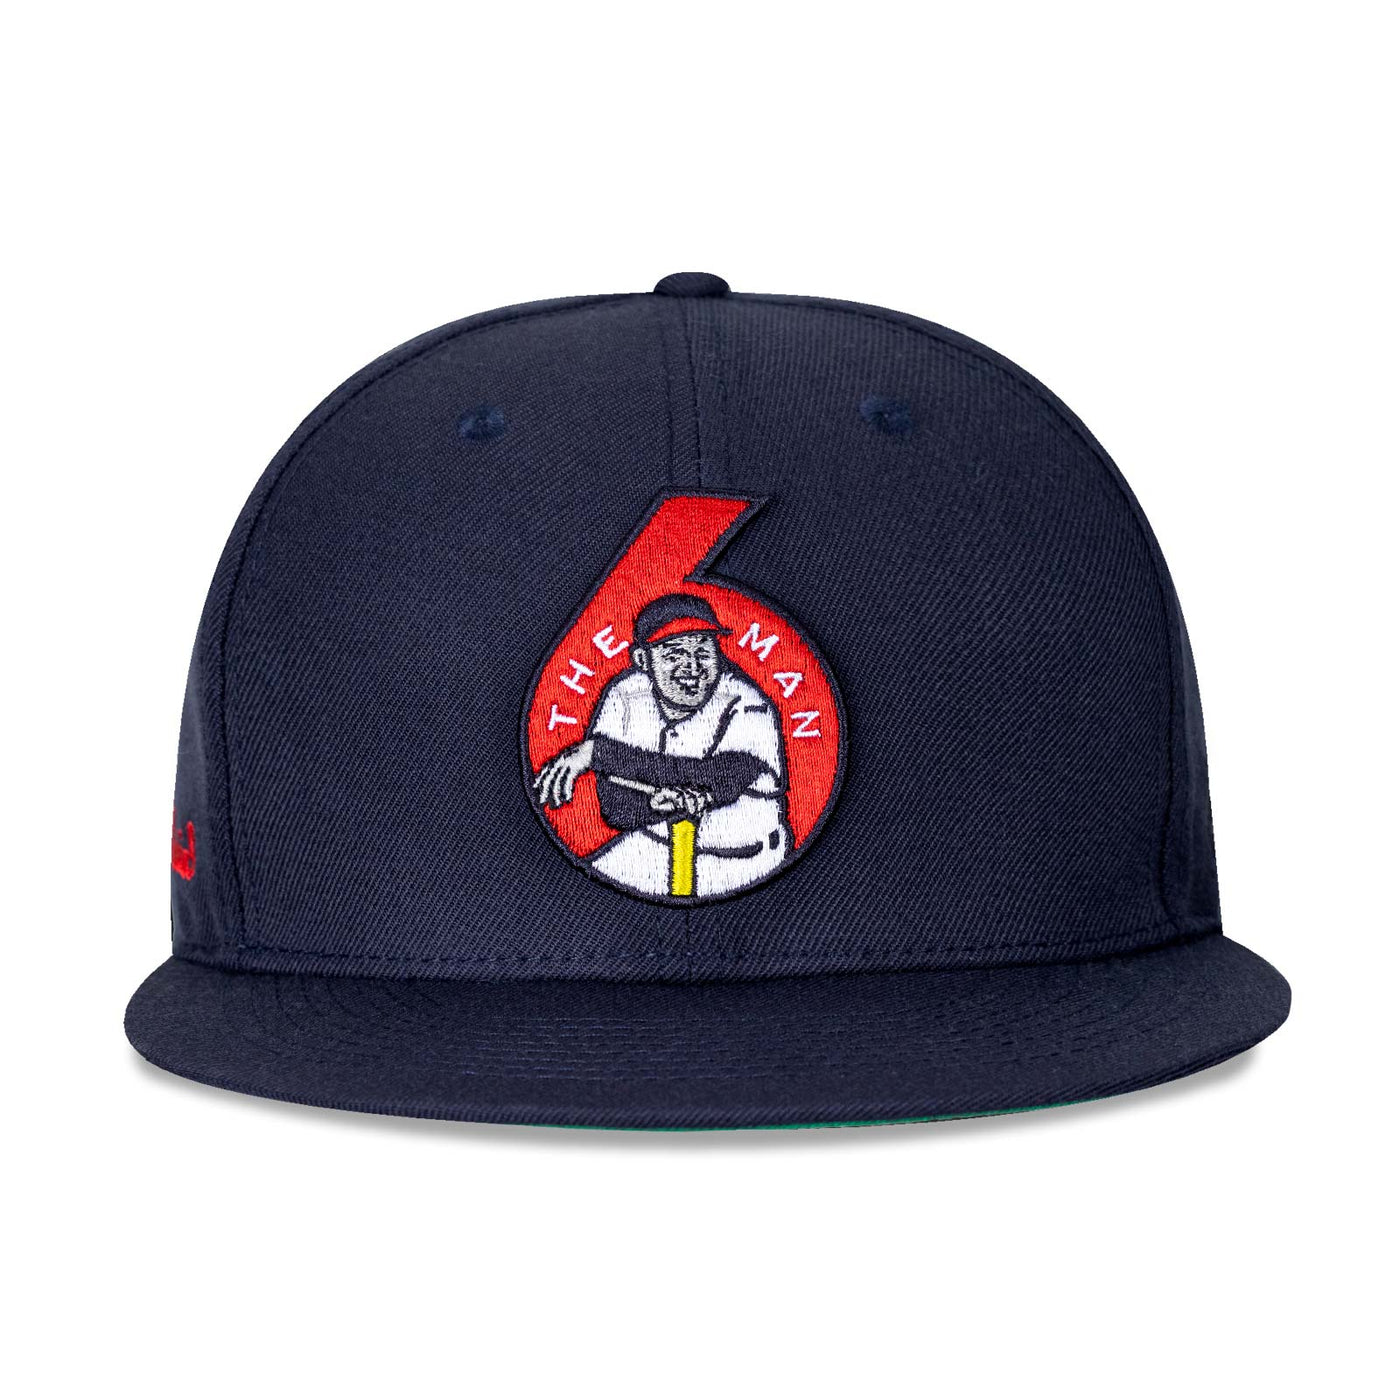 The Man Cap - Stan Musial Collection